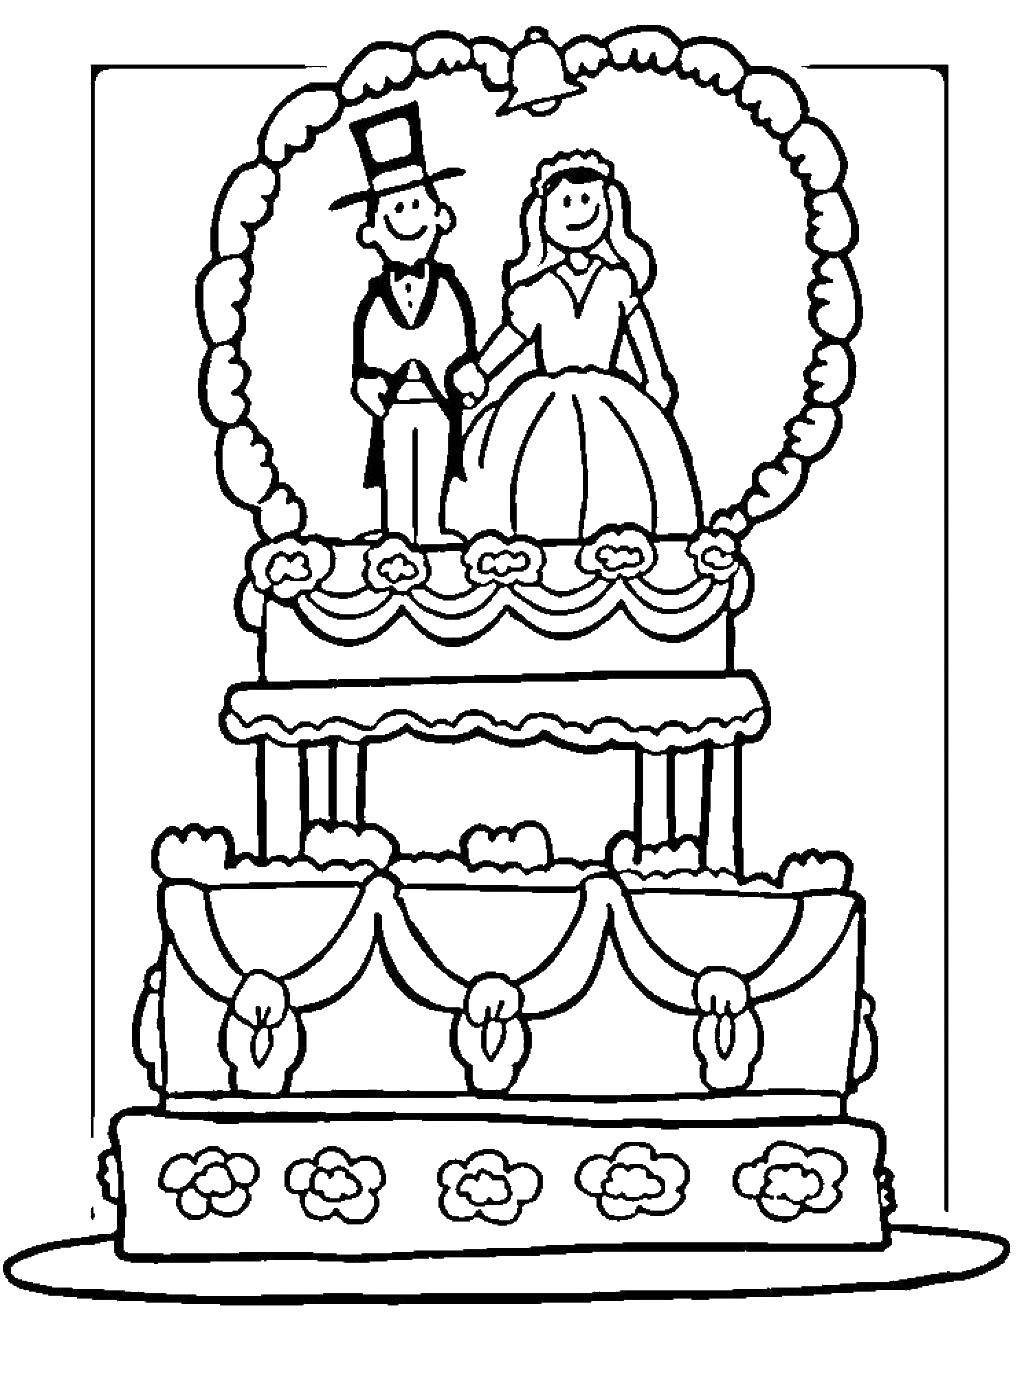 Coloring Wedding cake with figurines of the bride and groom. Category Wedding. Tags:  wedding, dress, cake.